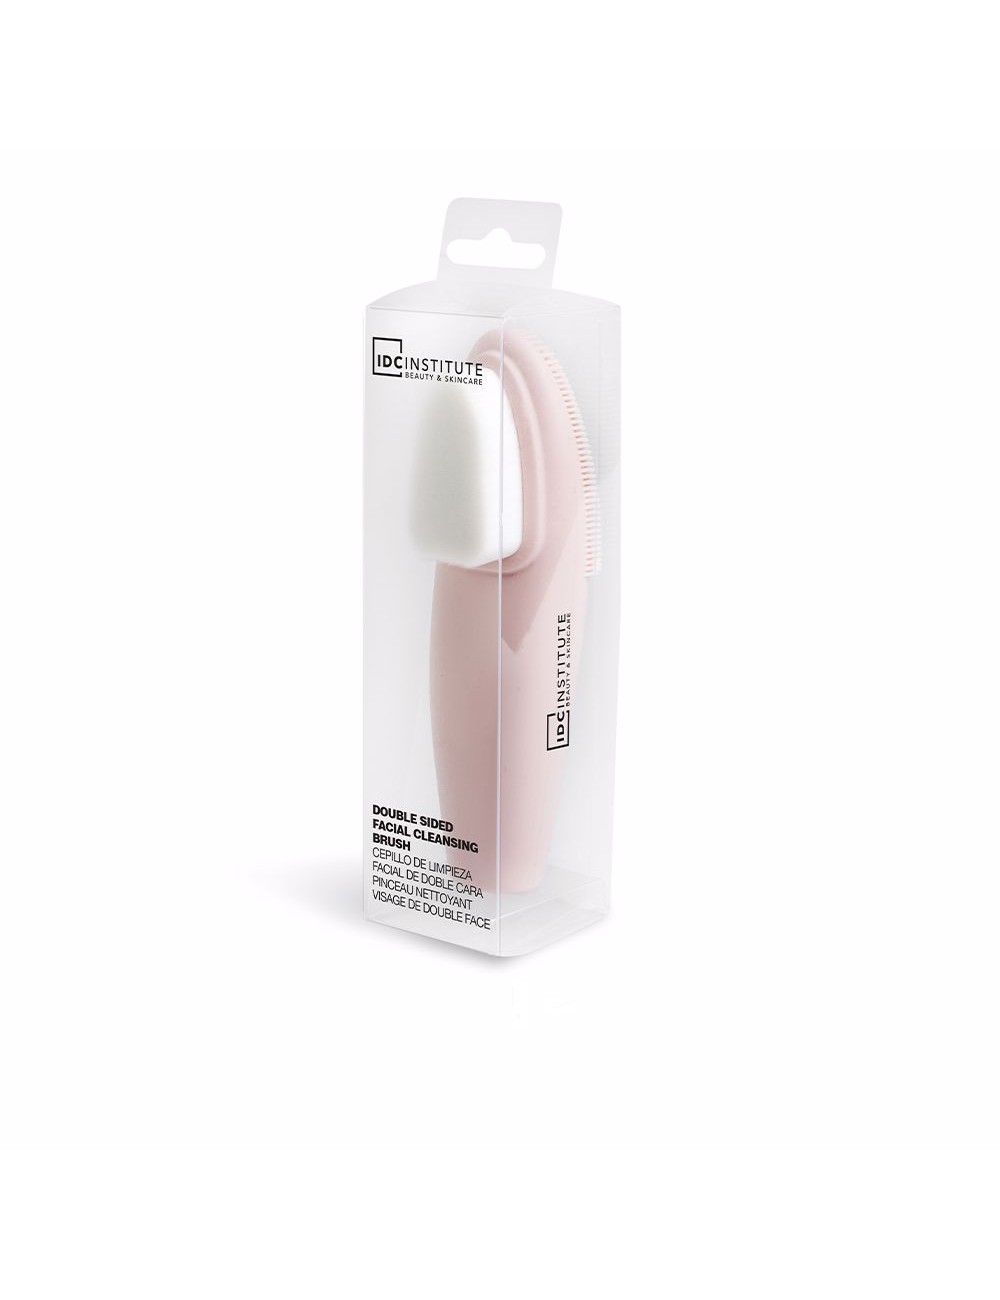 DOUBLE SIDED facial cleansing brush 1 uds